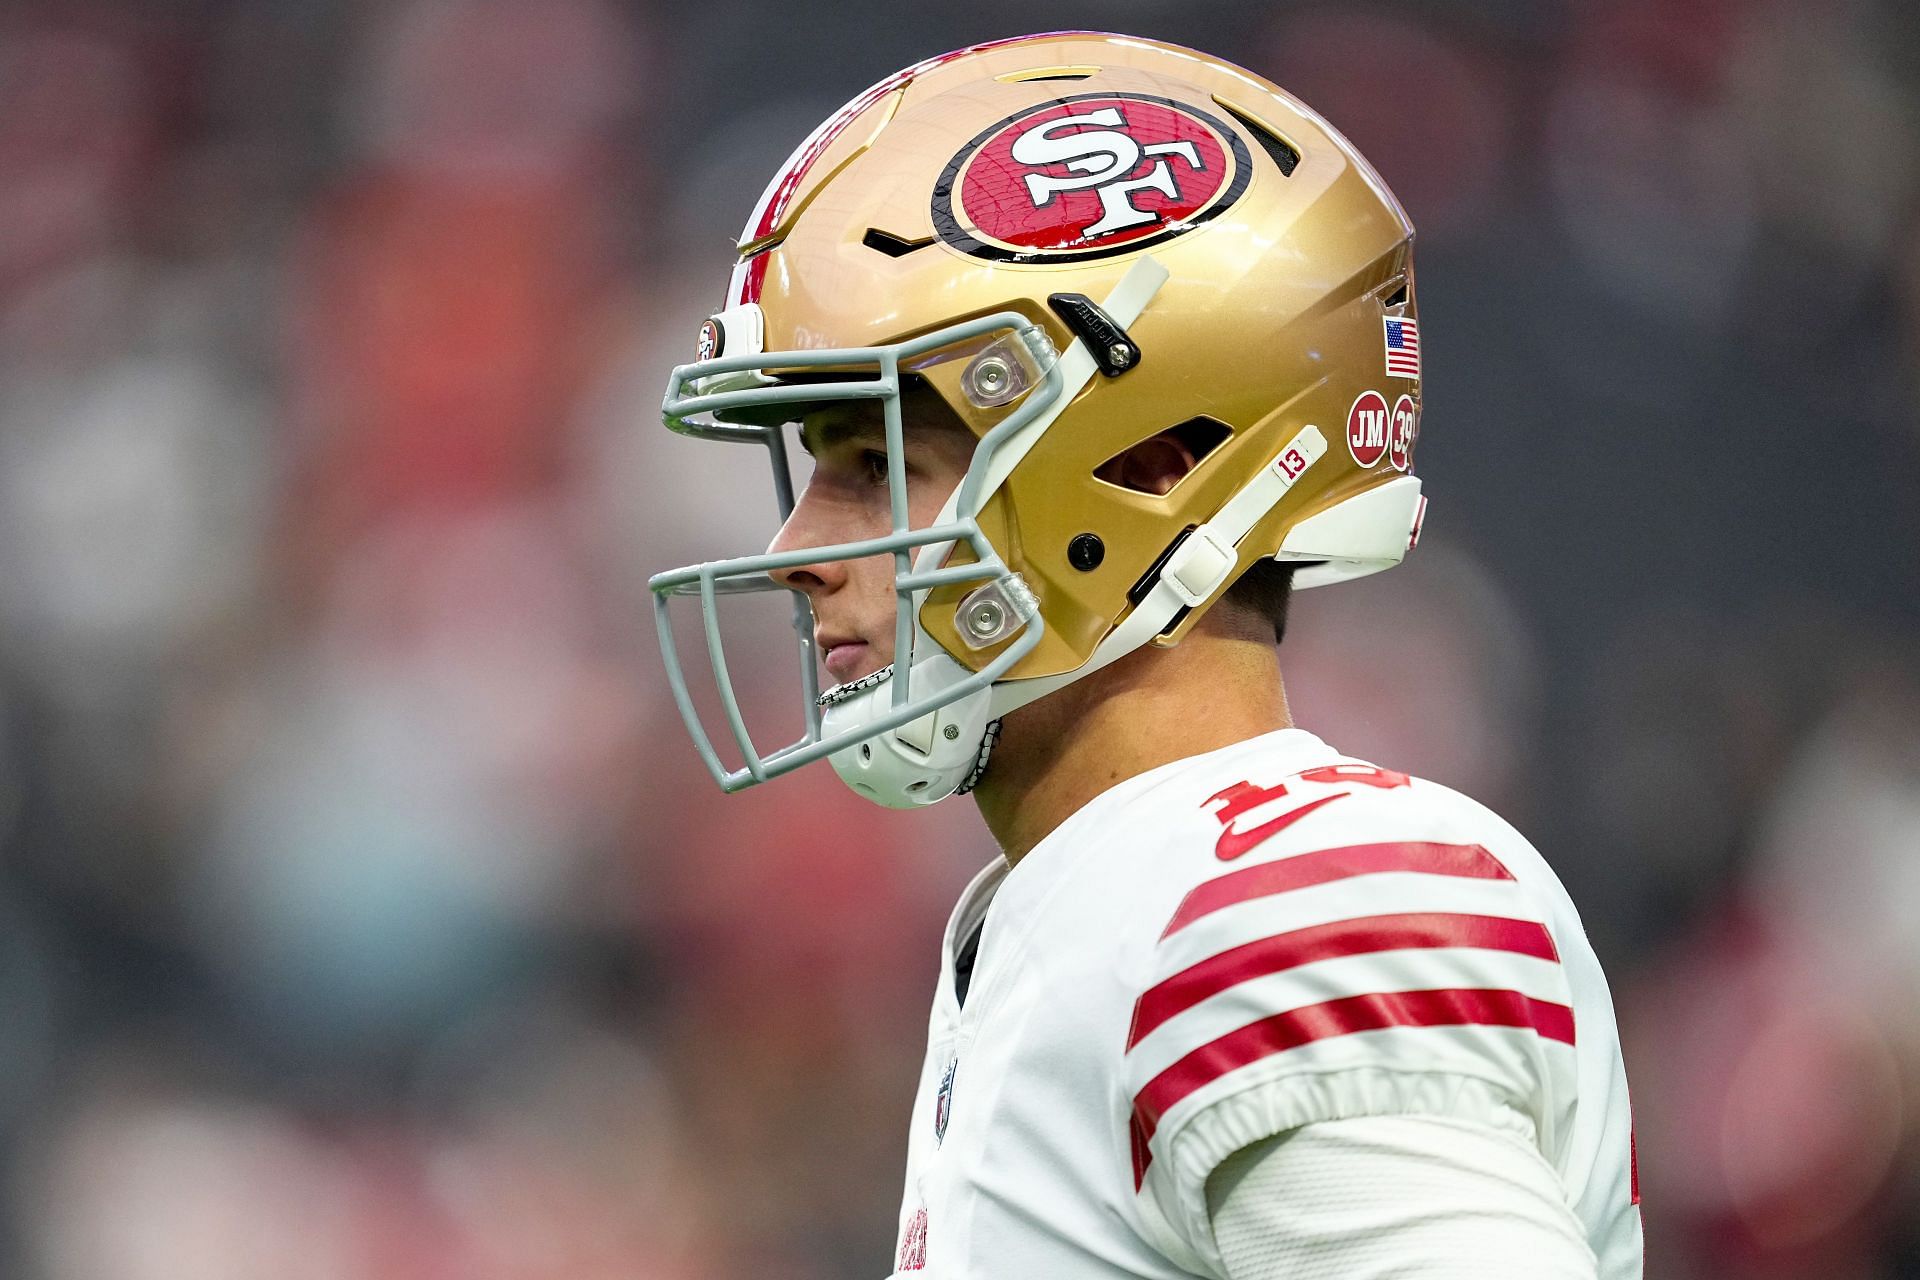 Can the 49ers win the NFC? Analyzing scenarios and San Francisco’s chances of finishing #1 in standings